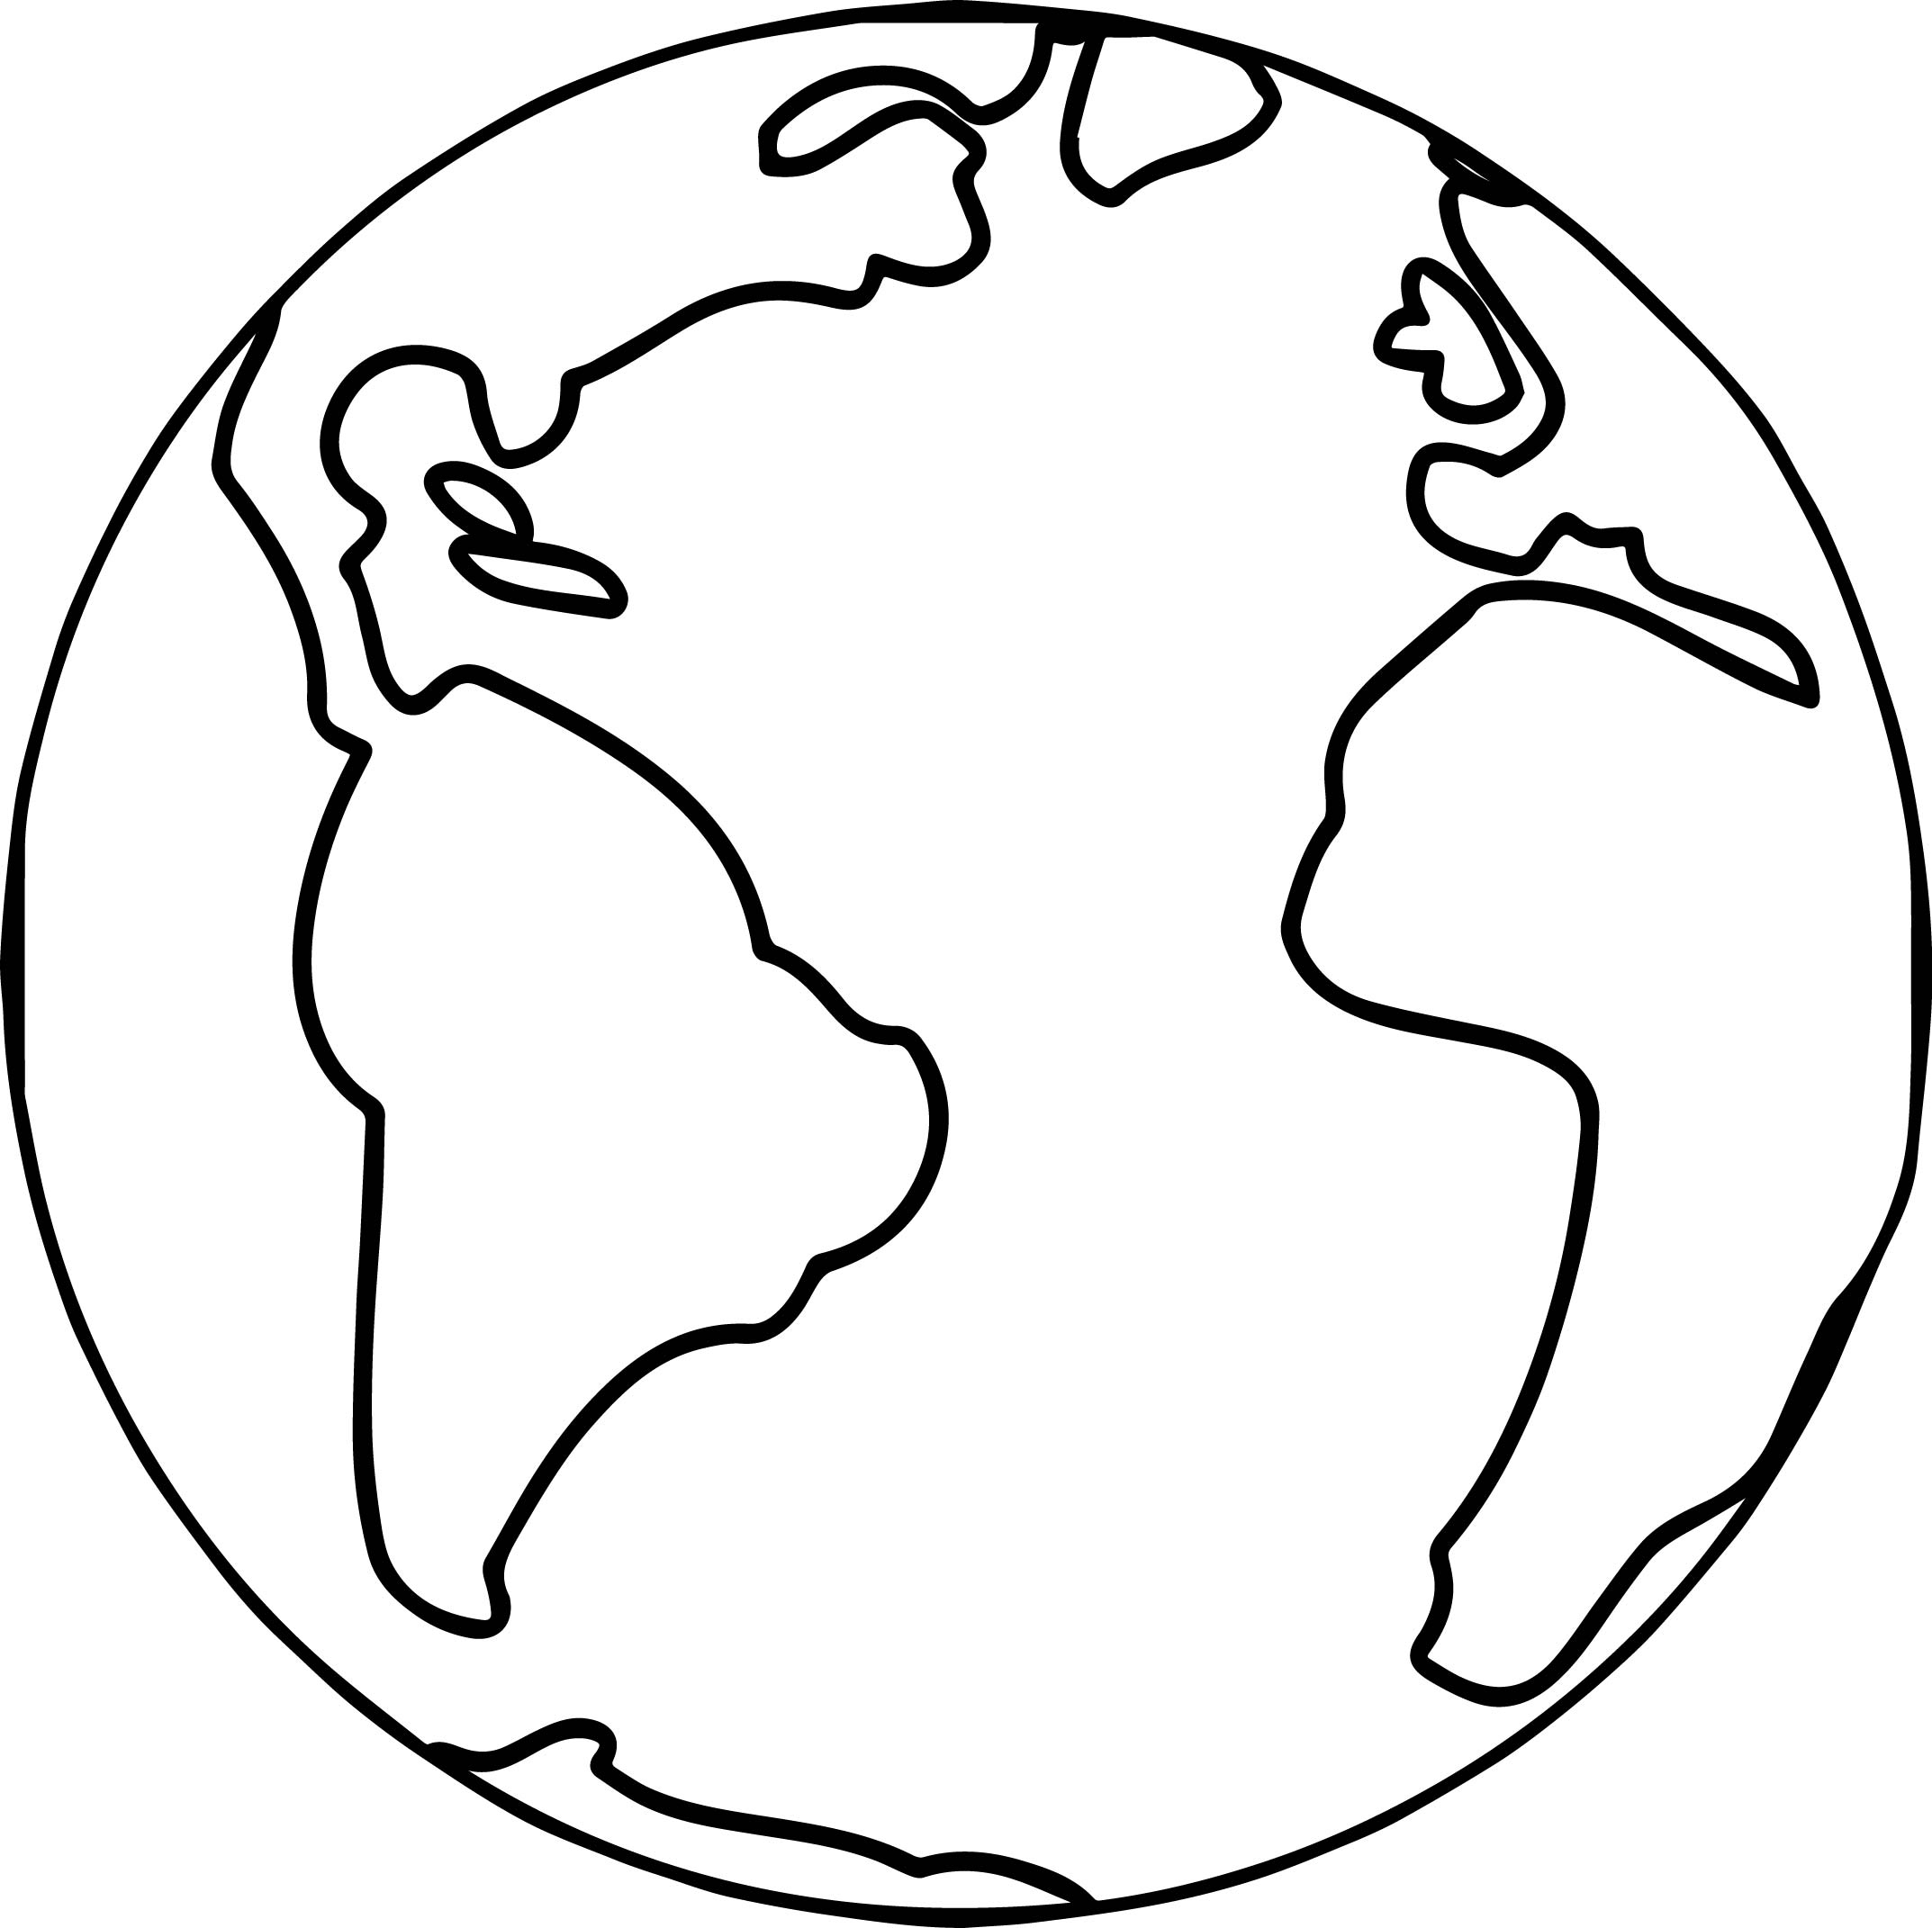 Coloring Pages Of The World Globe Coloring Page Free Download Best Globe Coloring Page On